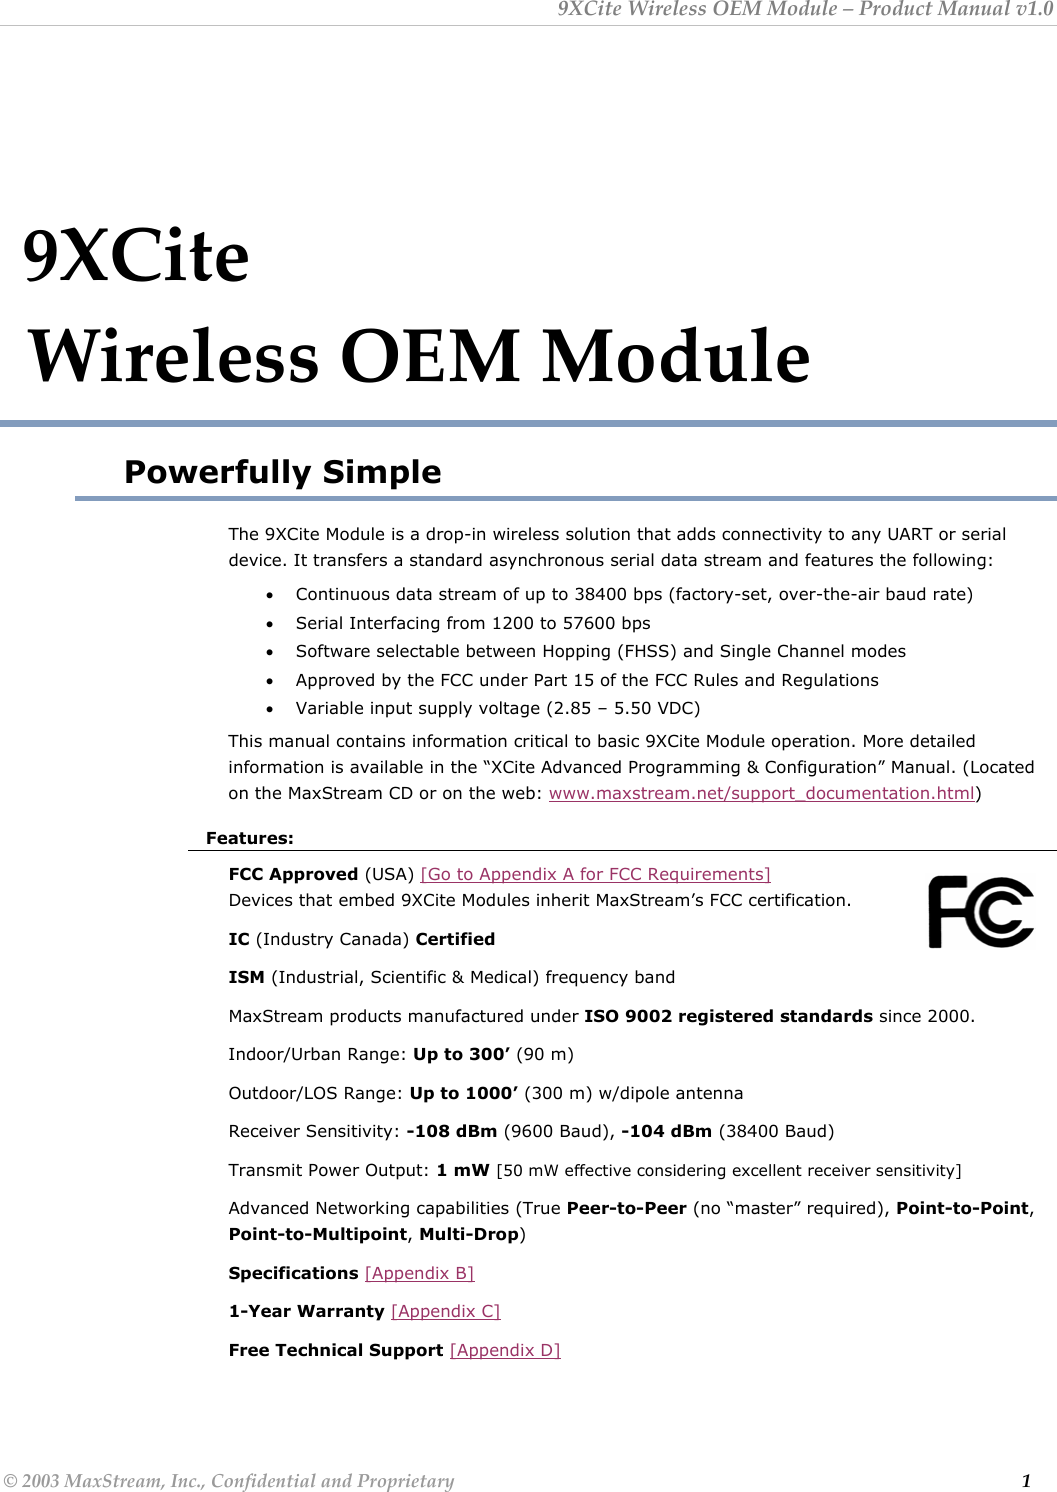 9XCite Wireless OEM Module – Product Manual v1.0  9XCite                              Wireless OEM Module Powerfully Simple The 9XCite Module is a drop-in wireless solution that adds connectivity to any UART or serial device. It transfers a standard asynchronous serial data stream and features the following: • Continuous data stream of up to 38400 bps (factory-set, over-the-air baud rate) • Serial Interfacing from 1200 to 57600 bps • Software selectable between Hopping (FHSS) and Single Channel modes • Approved by the FCC under Part 15 of the FCC Rules and Regulations • Variable input supply voltage (2.85 – 5.50 VDC) This manual contains information critical to basic 9XCite Module operation. More detailed information is available in the “XCite Advanced Programming &amp; Configuration” Manual. (Located on the MaxStream CD or on the web: www.maxstream.net/support_documentation.html) Features: FCC Approved (USA) [Go to Appendix A for FCC Requirements]                    Devices that embed 9XCite Modules inherit MaxStream’s FCC certification. IC (Industry Canada) Certified ISM (Industrial, Scientific &amp; Medical) frequency band MaxStream products manufactured under ISO 9002 registered standards since 2000. Indoor/Urban Range: Up to 300’ (90 m) Outdoor/LOS Range: Up to 1000’ (300 m) w/dipole antenna Receiver Sensitivity: -108 dBm (9600 Baud), -104 dBm (38400 Baud) Transmit Power Output: 1 mW [50 mW effective considering excellent receiver sensitivity] Advanced Networking capabilities (True Peer-to-Peer (no “master” required), Point-to-Point, Point-to-Multipoint, Multi-Drop) Specifications [Appendix B] 1-Year Warranty [Appendix C] Free Technical Support [Appendix D] © 2003 MaxStream, Inc., Confidential and Proprietary                                                                                                                         1 